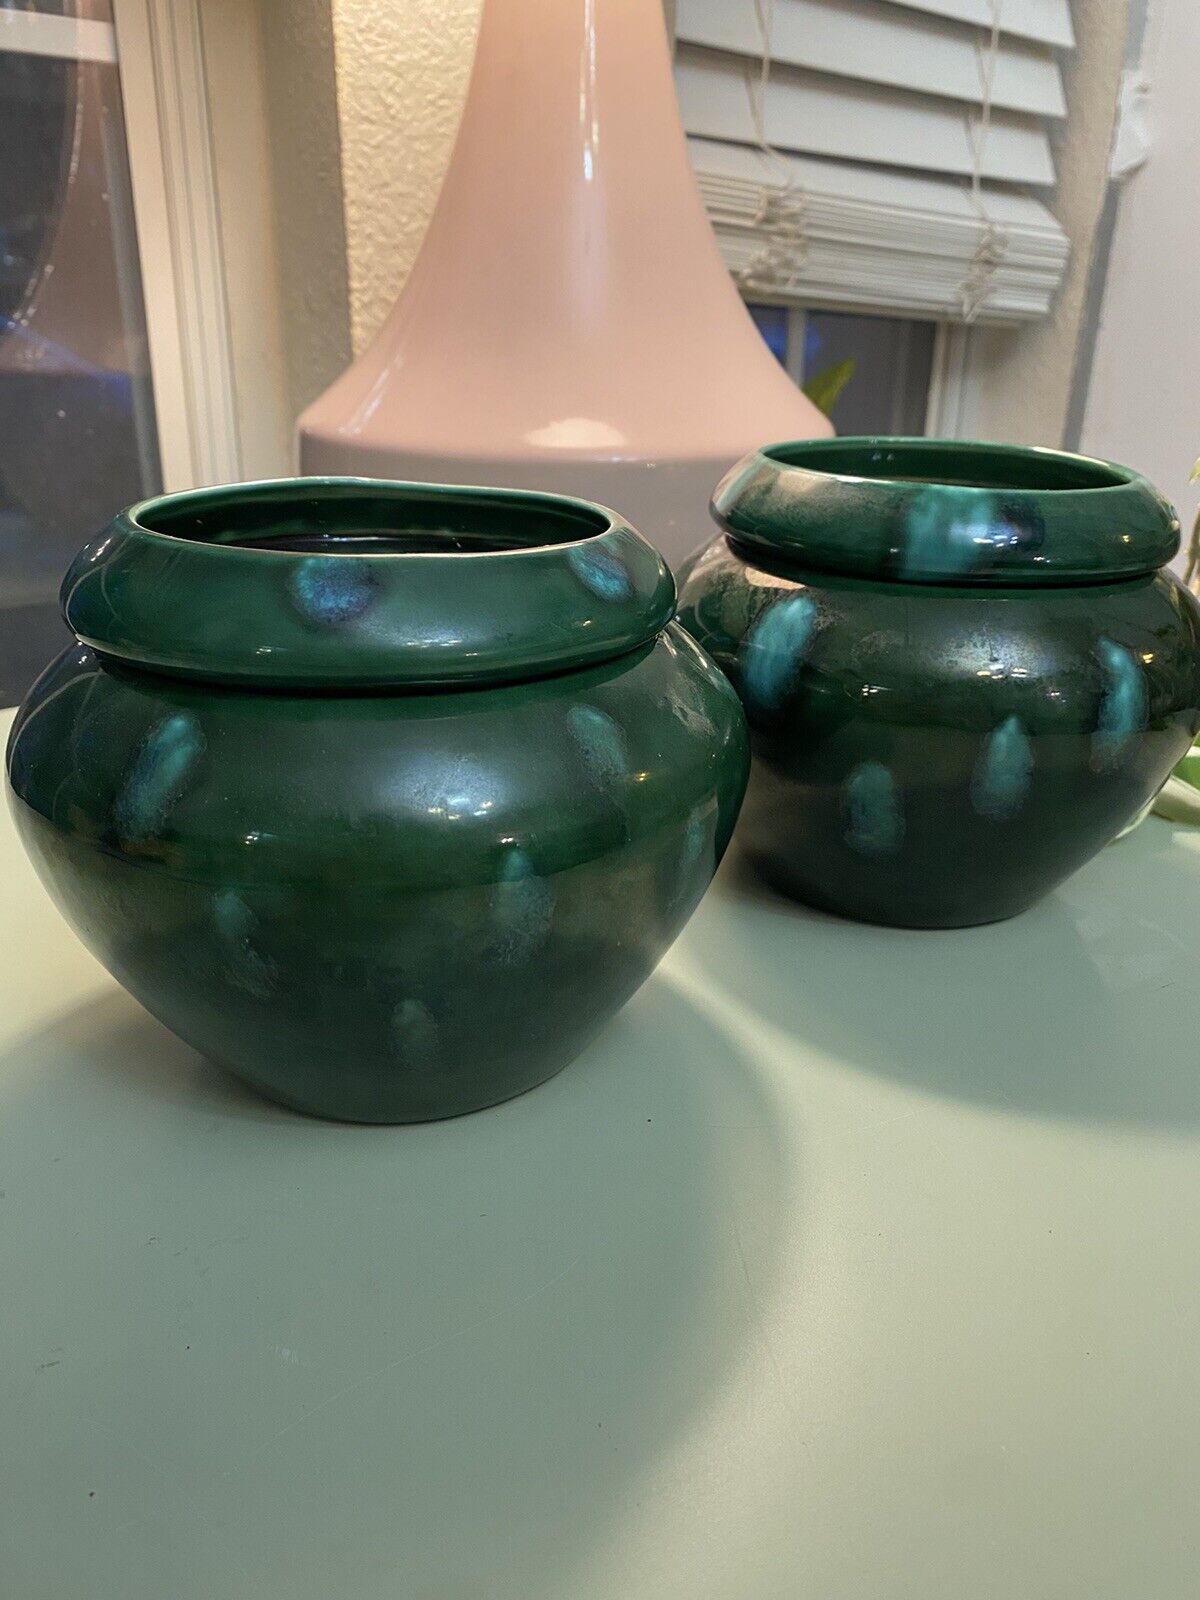 2 Two The Violet Pot Flower Self Watering Planters Green Glazed Ceramic 1997